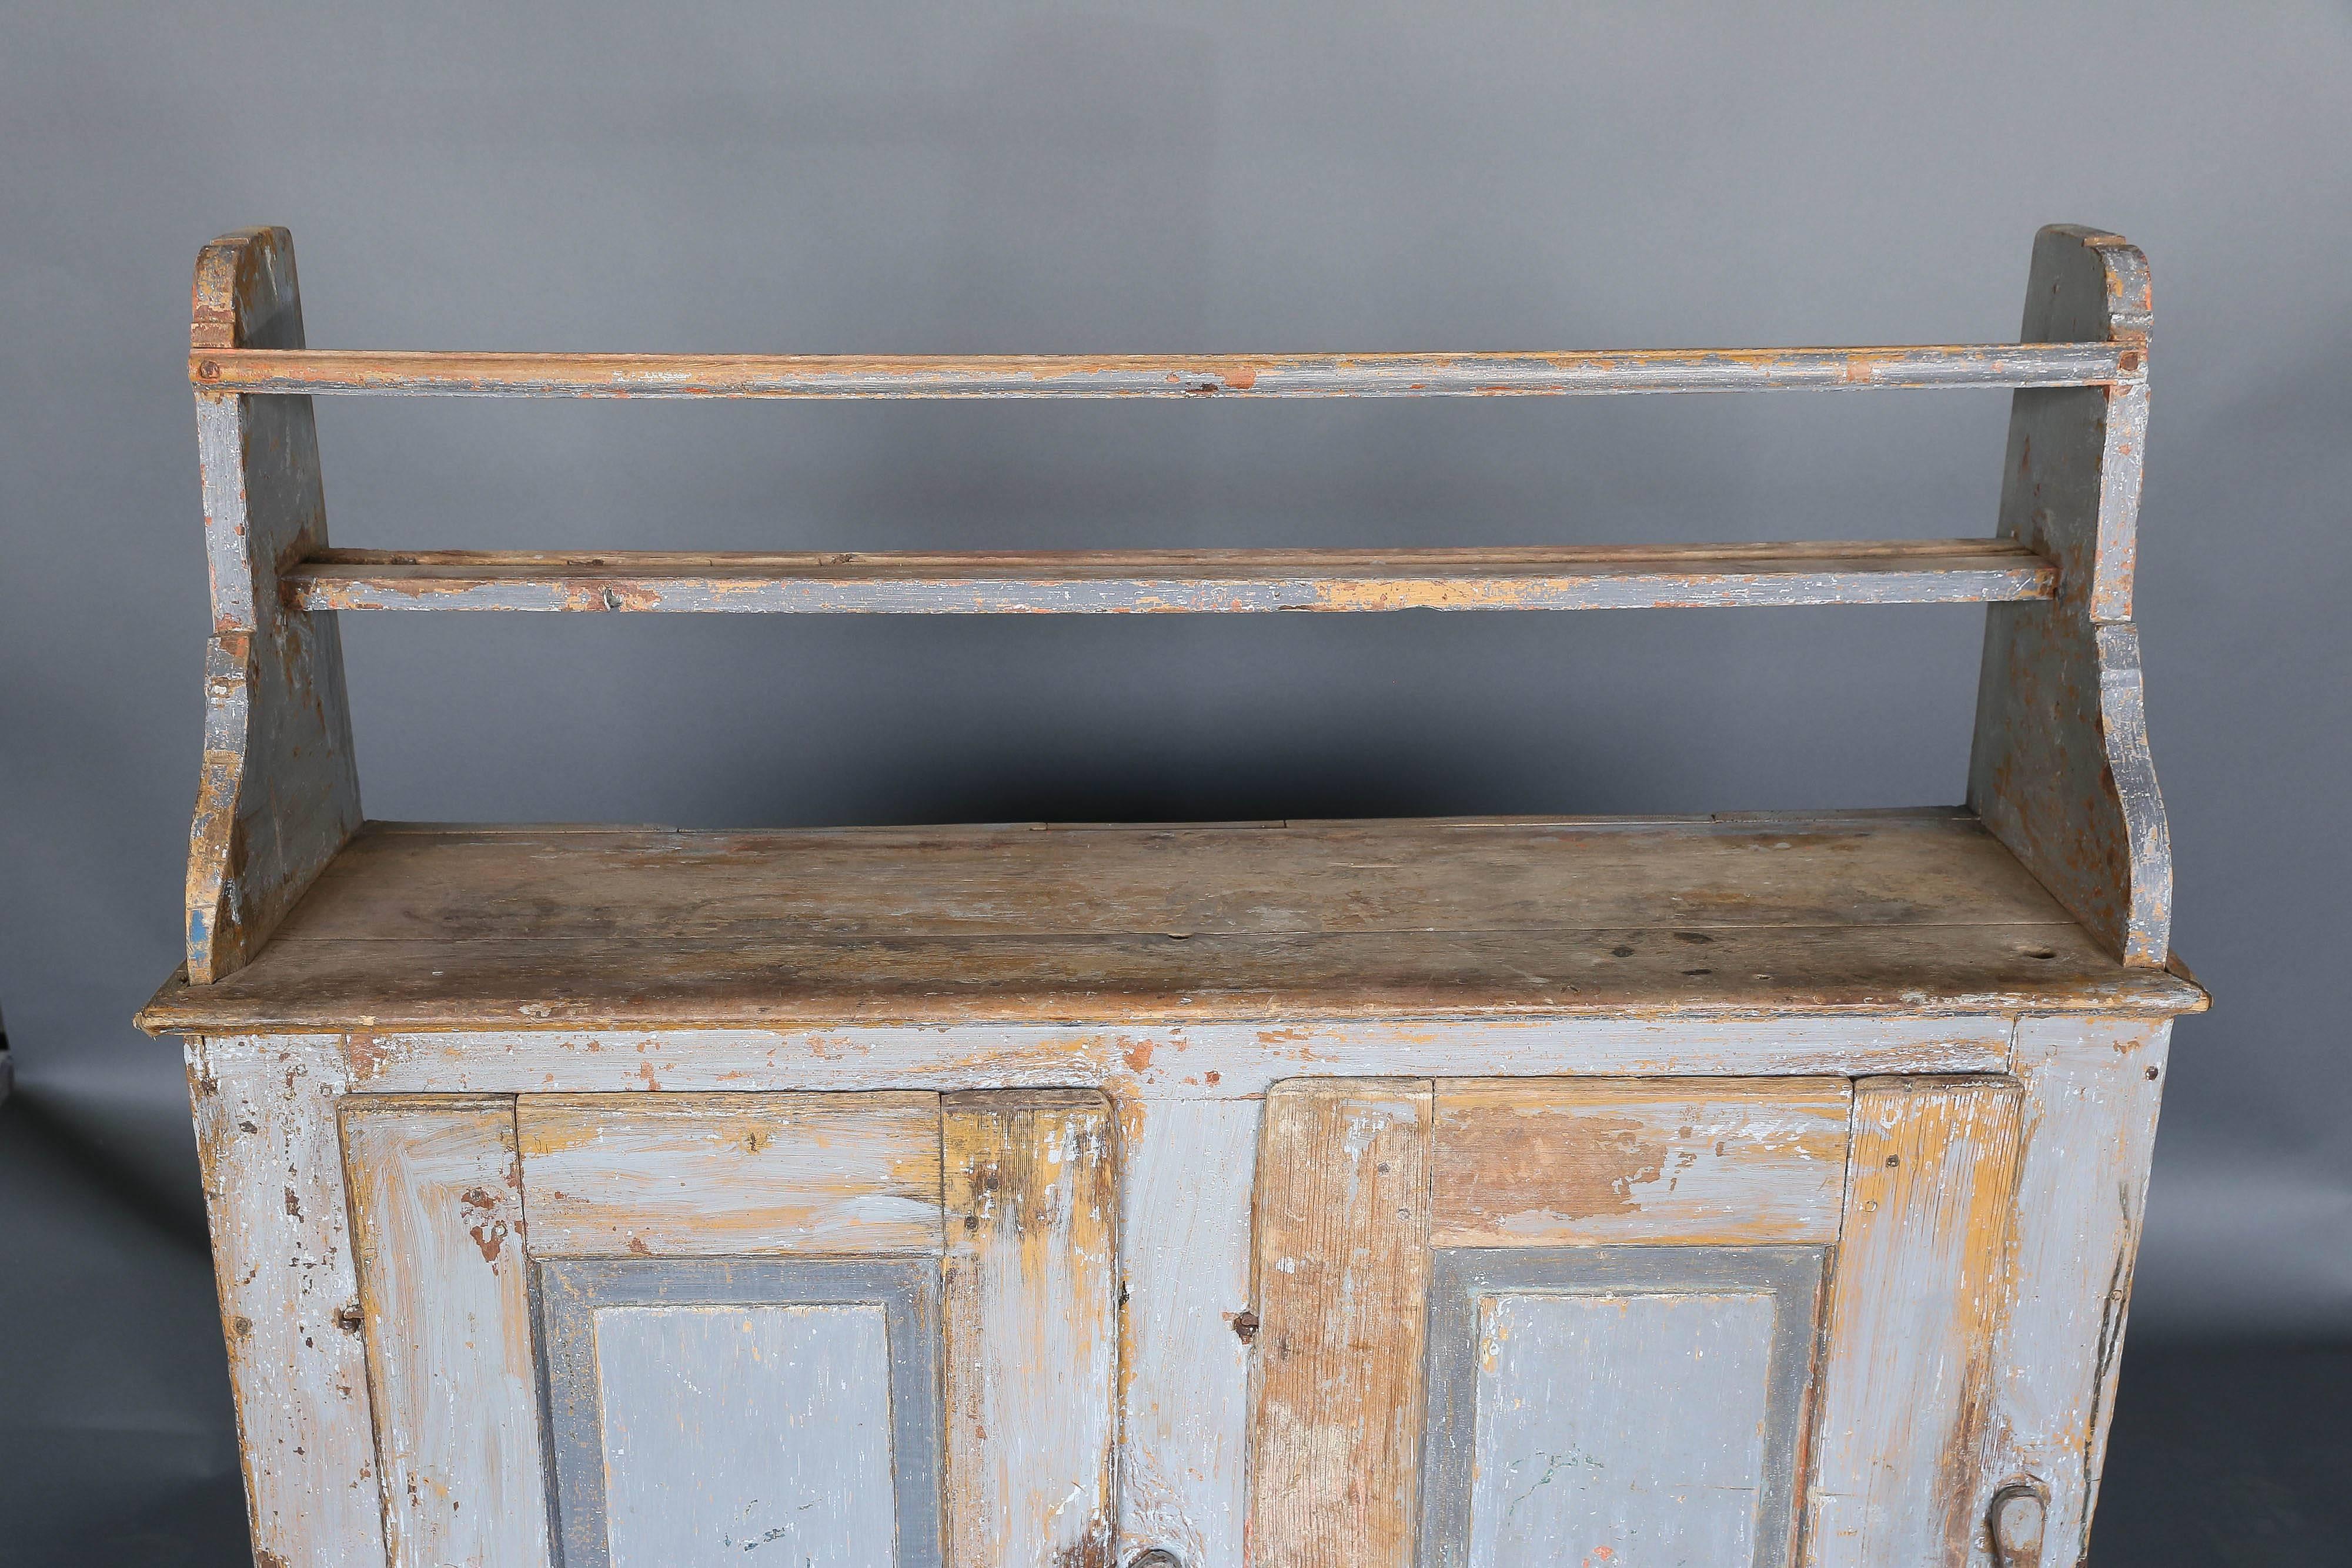 Antique primitive 18th century narrow Swedish cabinet with shelf in a beautifully worn light blue paint. Clasps on pair of cabinet doors are wood. Sculpted shelf with rack. Charming country piece.